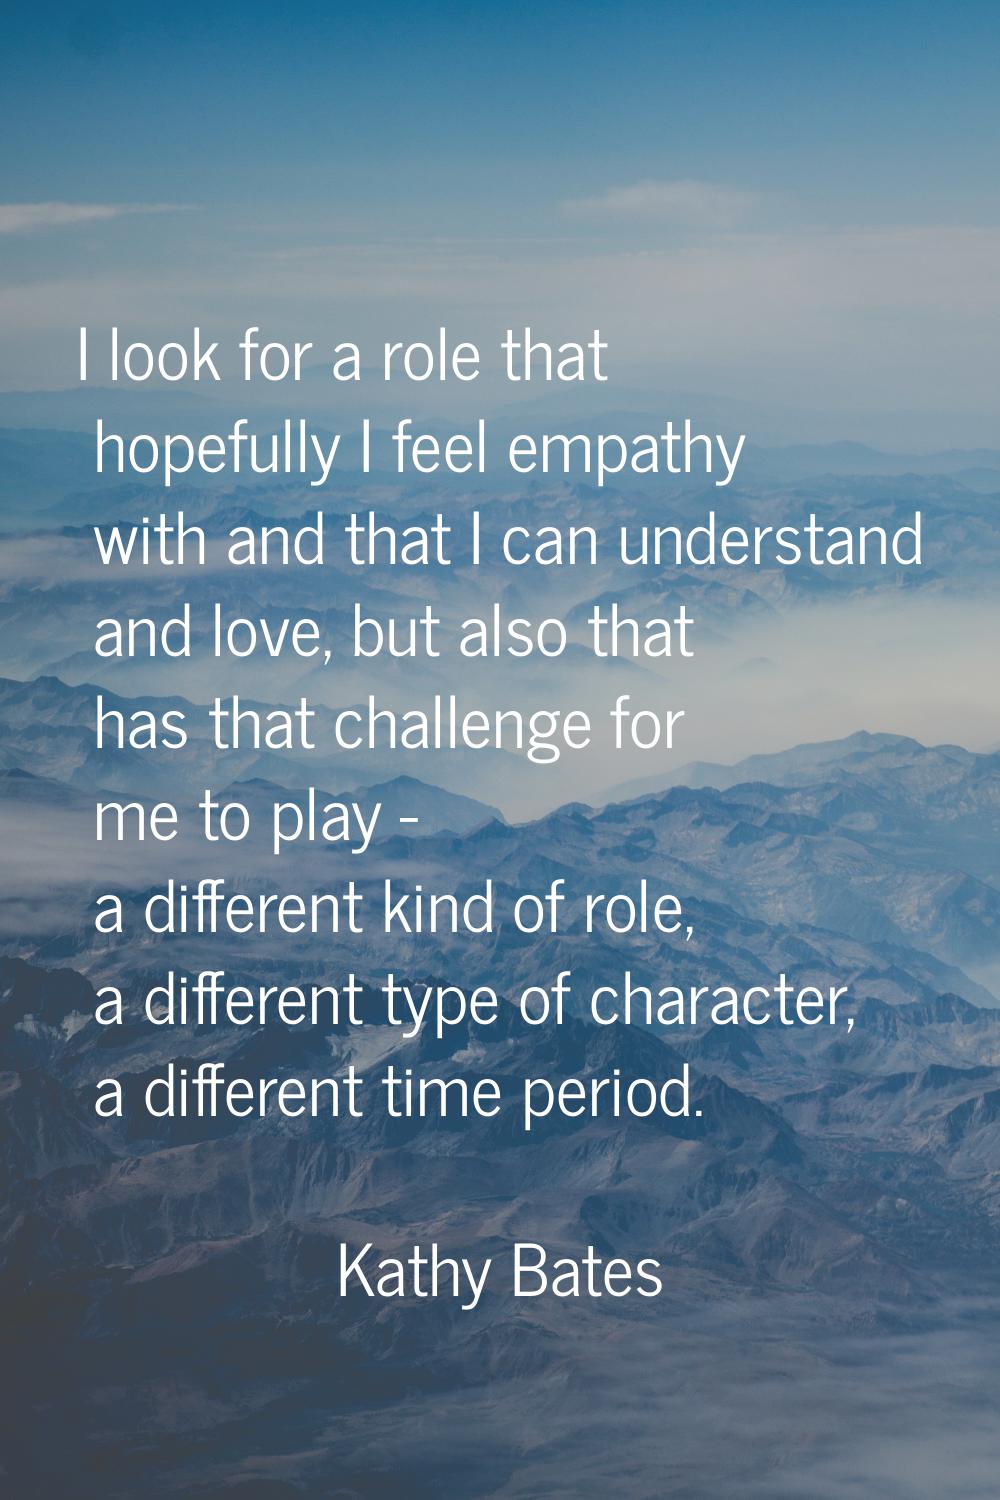 I look for a role that hopefully I feel empathy with and that I can understand and love, but also t